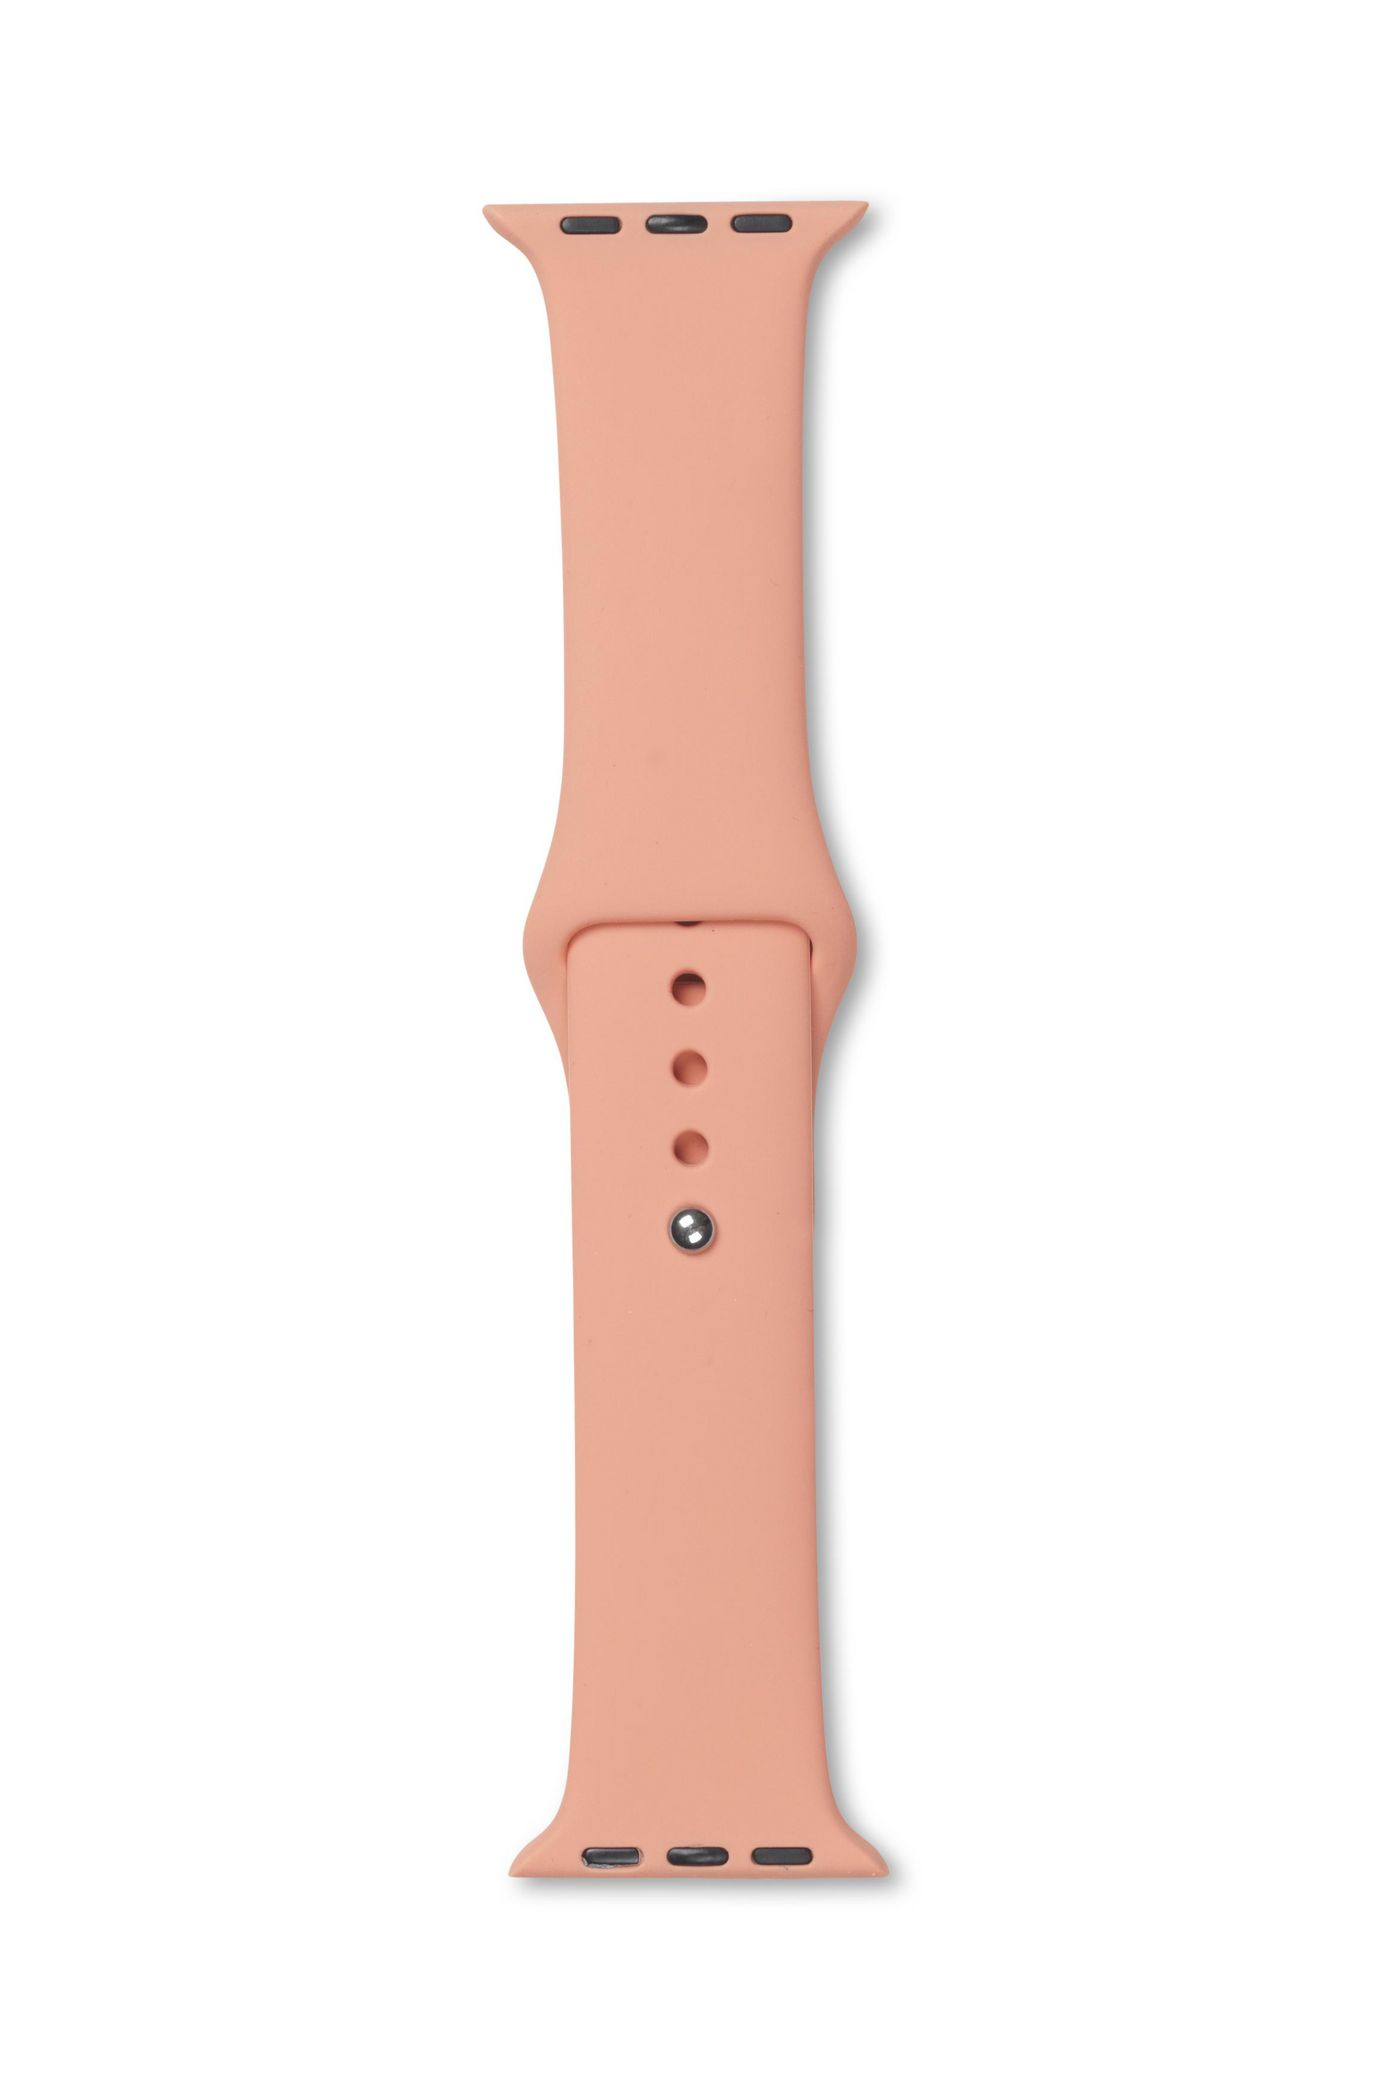 Apple Watch Silicone Strap Color: Peach Width 40mm